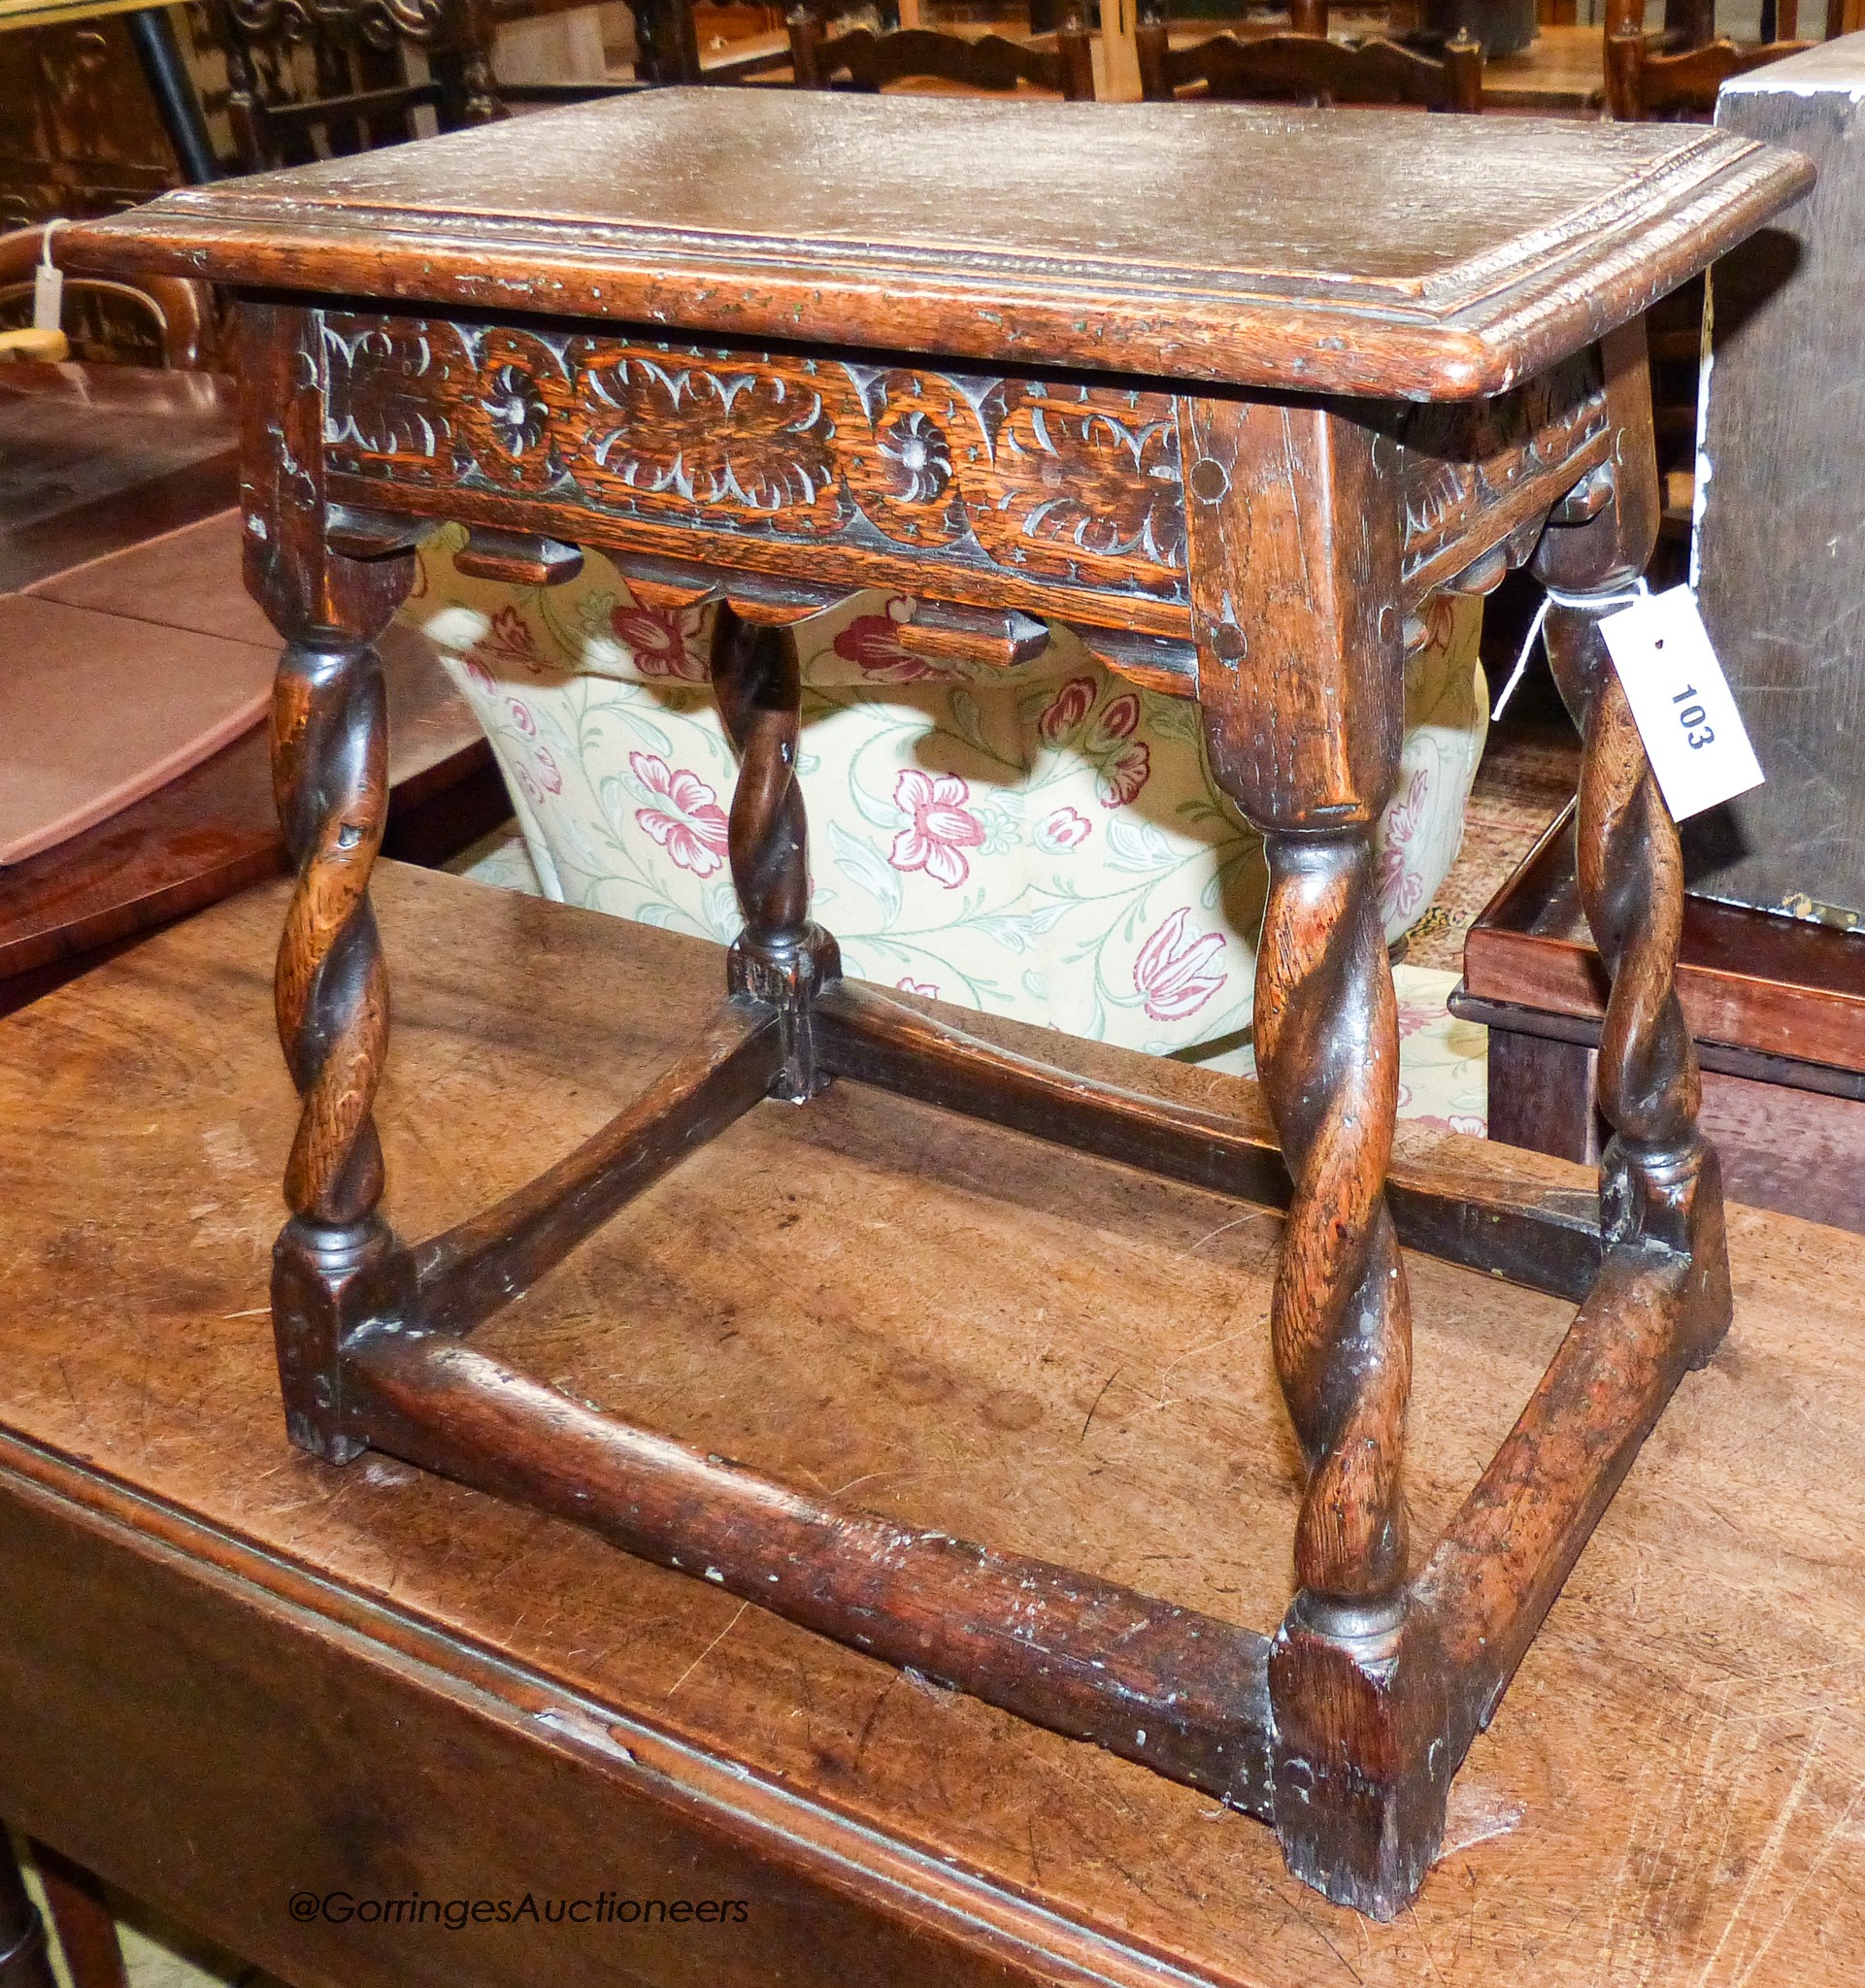 A late 19th / early 20th century oak joint stool on spiral-turned legs, width 46cm, depth 32cm, height 46cm